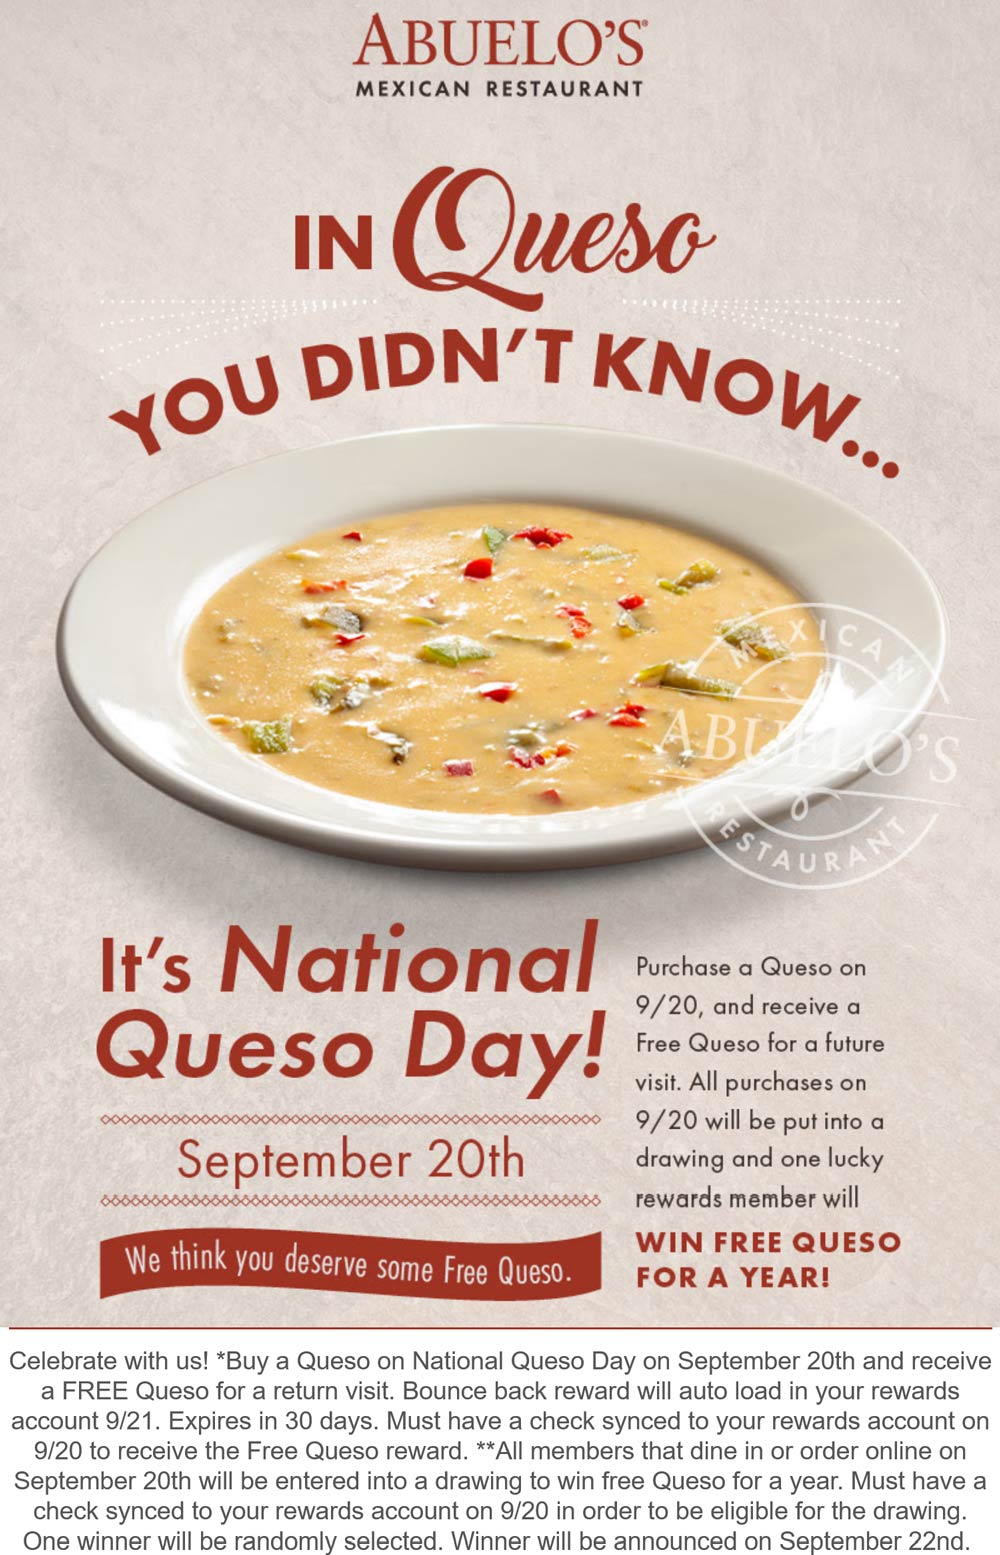 Abuelos restaurants Coupon  Second followup queso free today at Abuelos Mexican restaurants #abuelos 